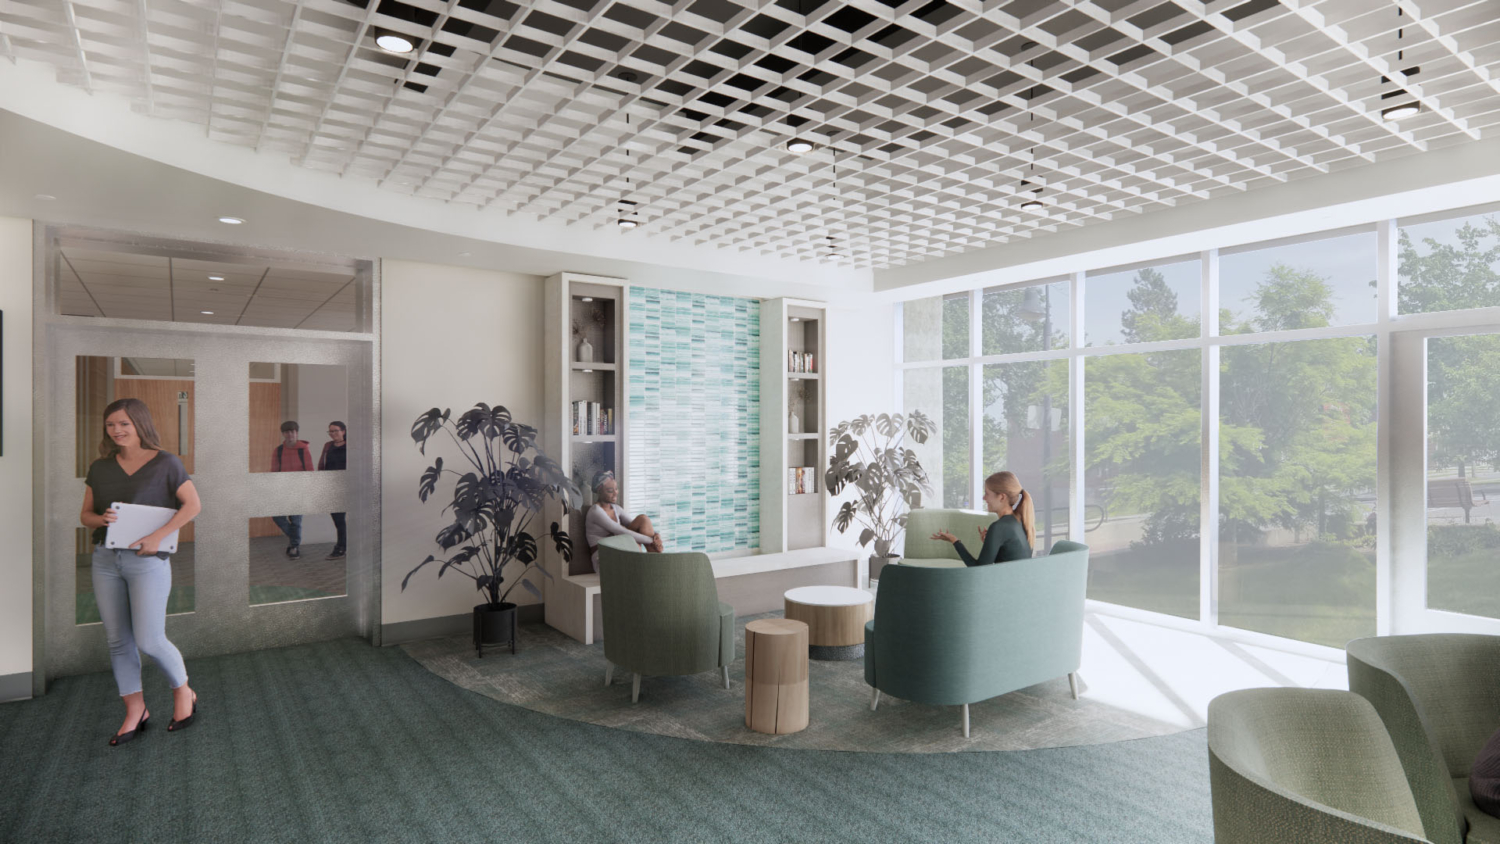 rendering of the center for well being showing students sitting in comfortable chairs near a water feature by a large window to the outside